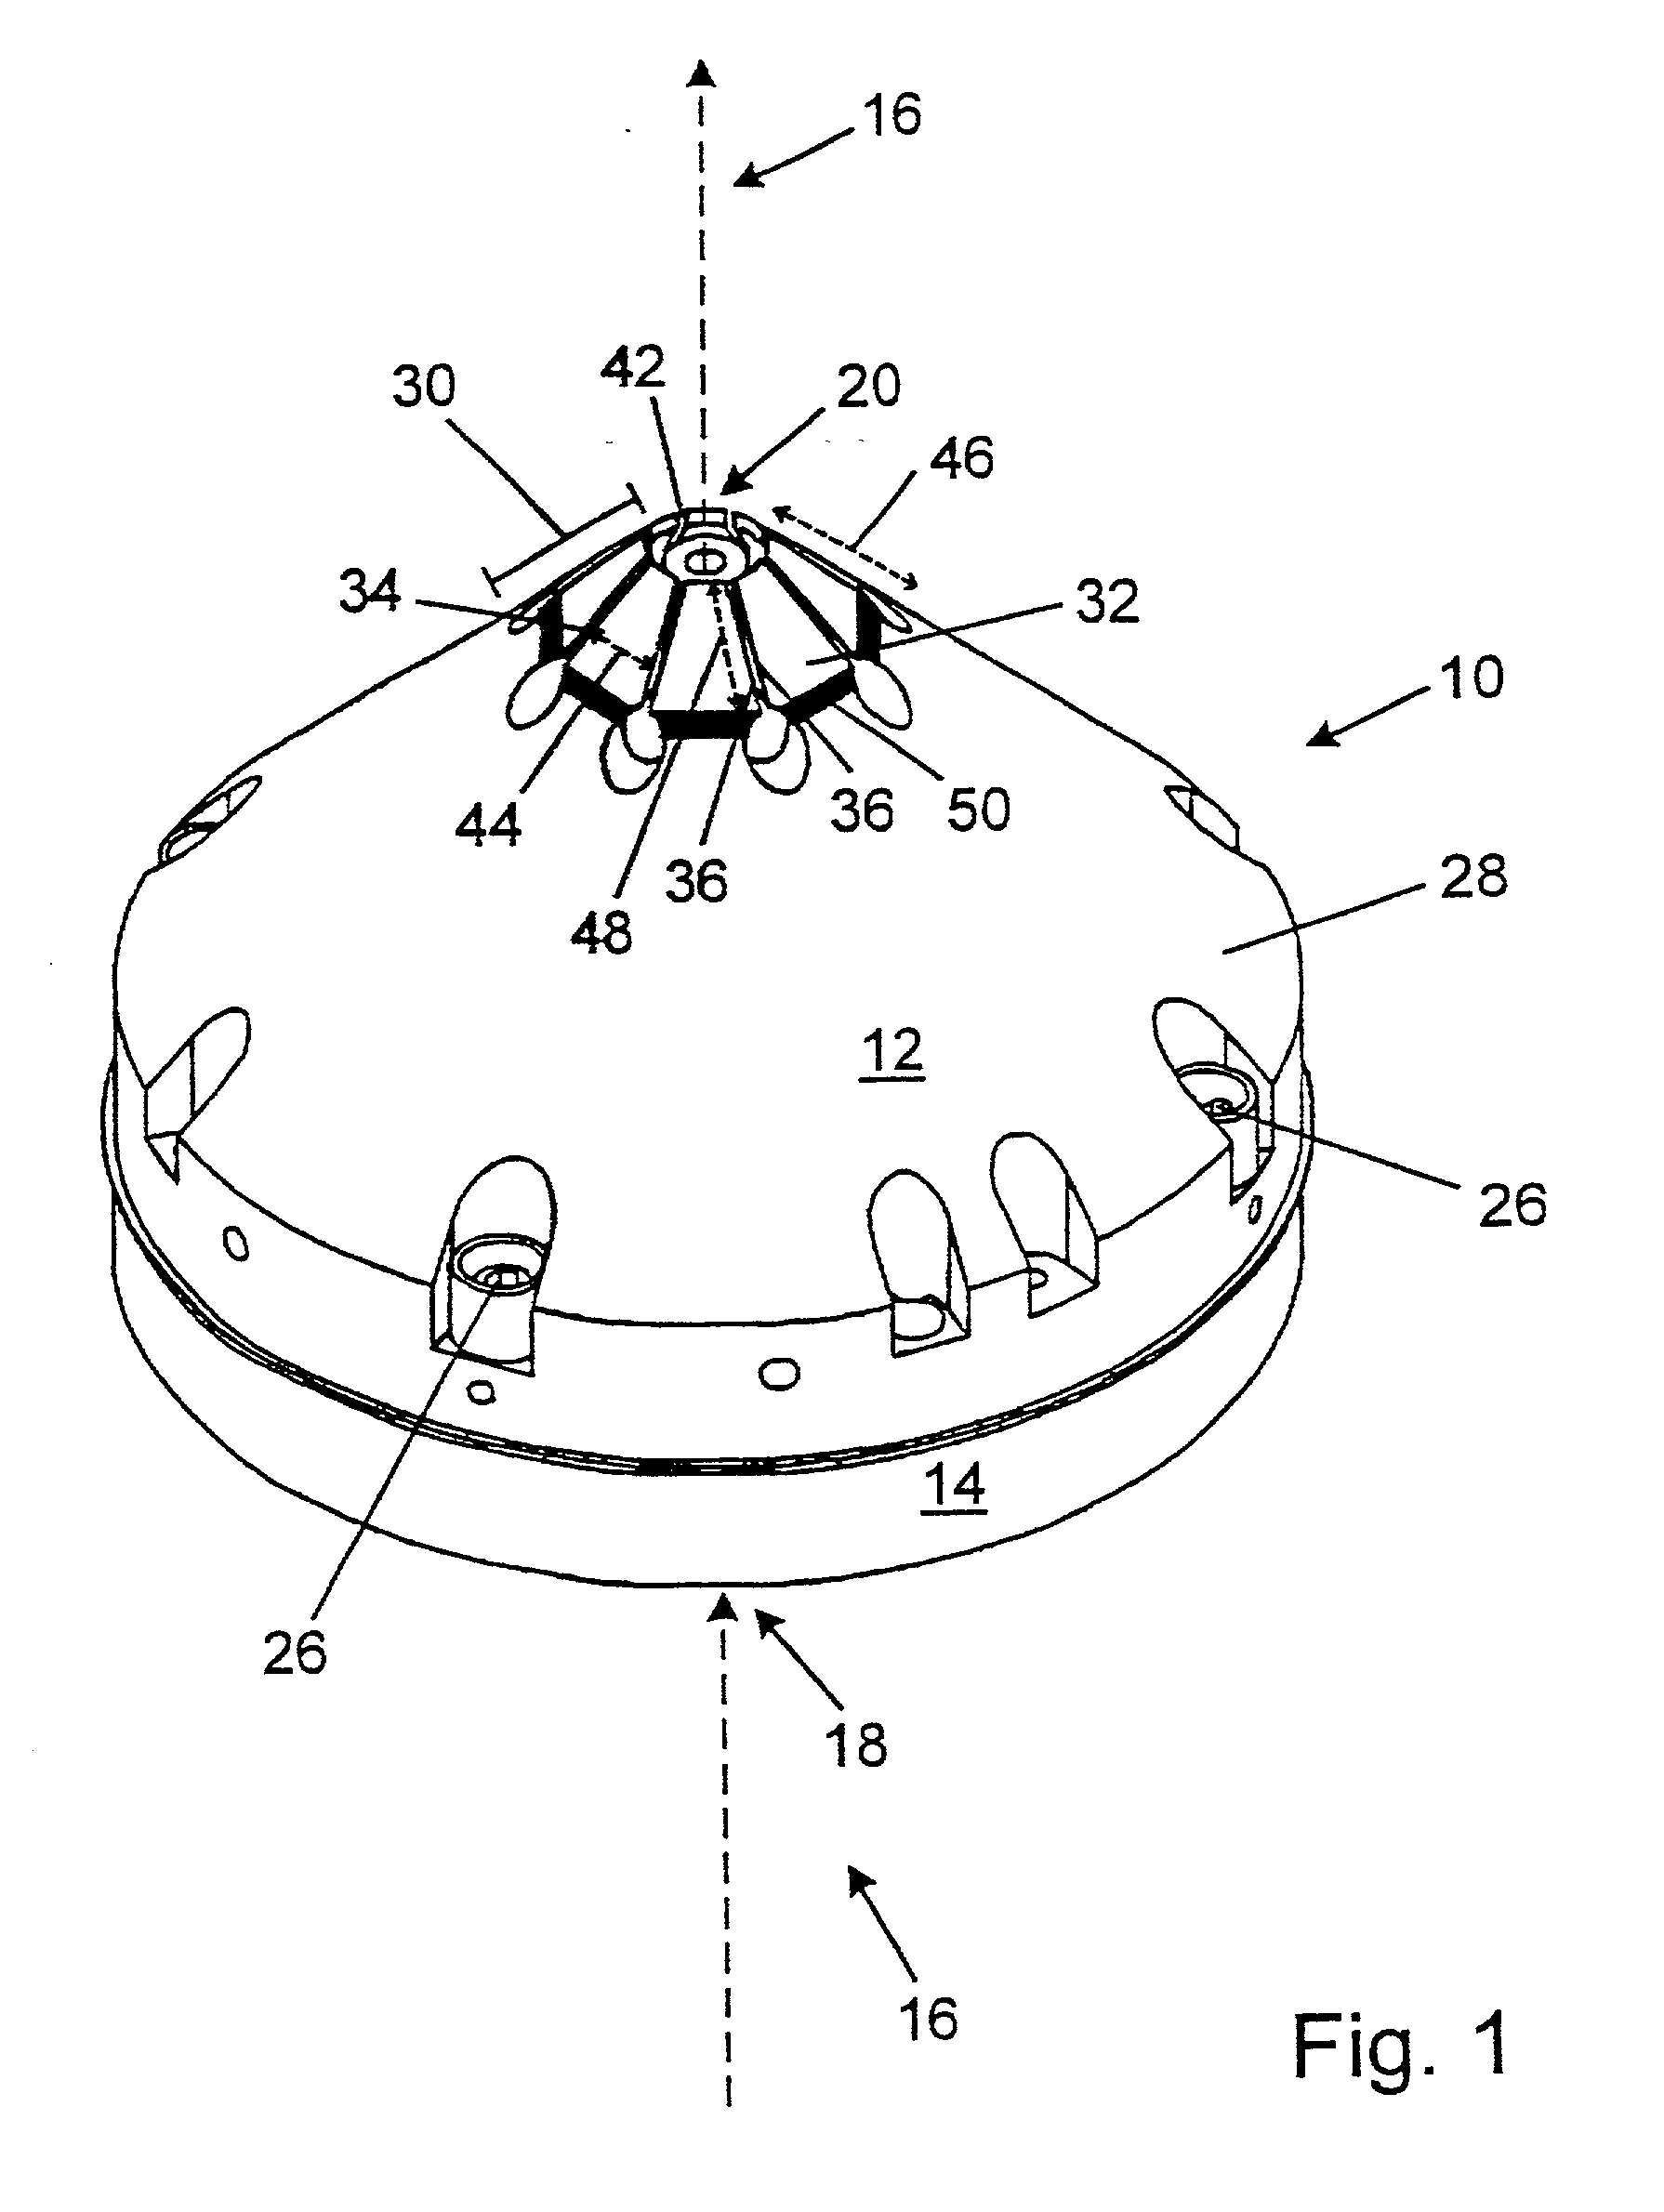 Apparatus and method for applying feedback control to a magnetic lens